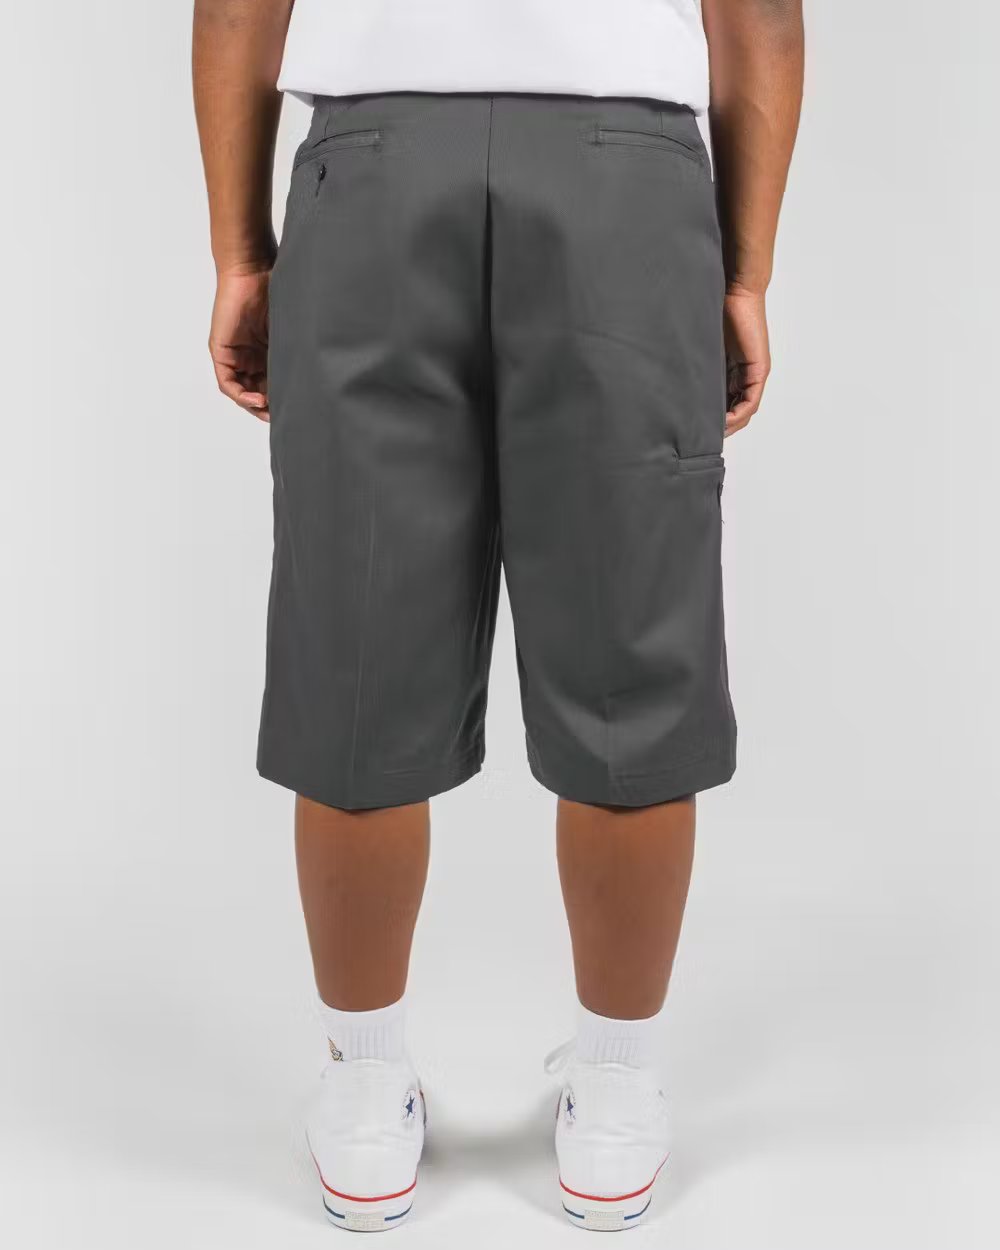 DICKIES 42283 Loose Fit Shorts - Charcoal - VENUE.